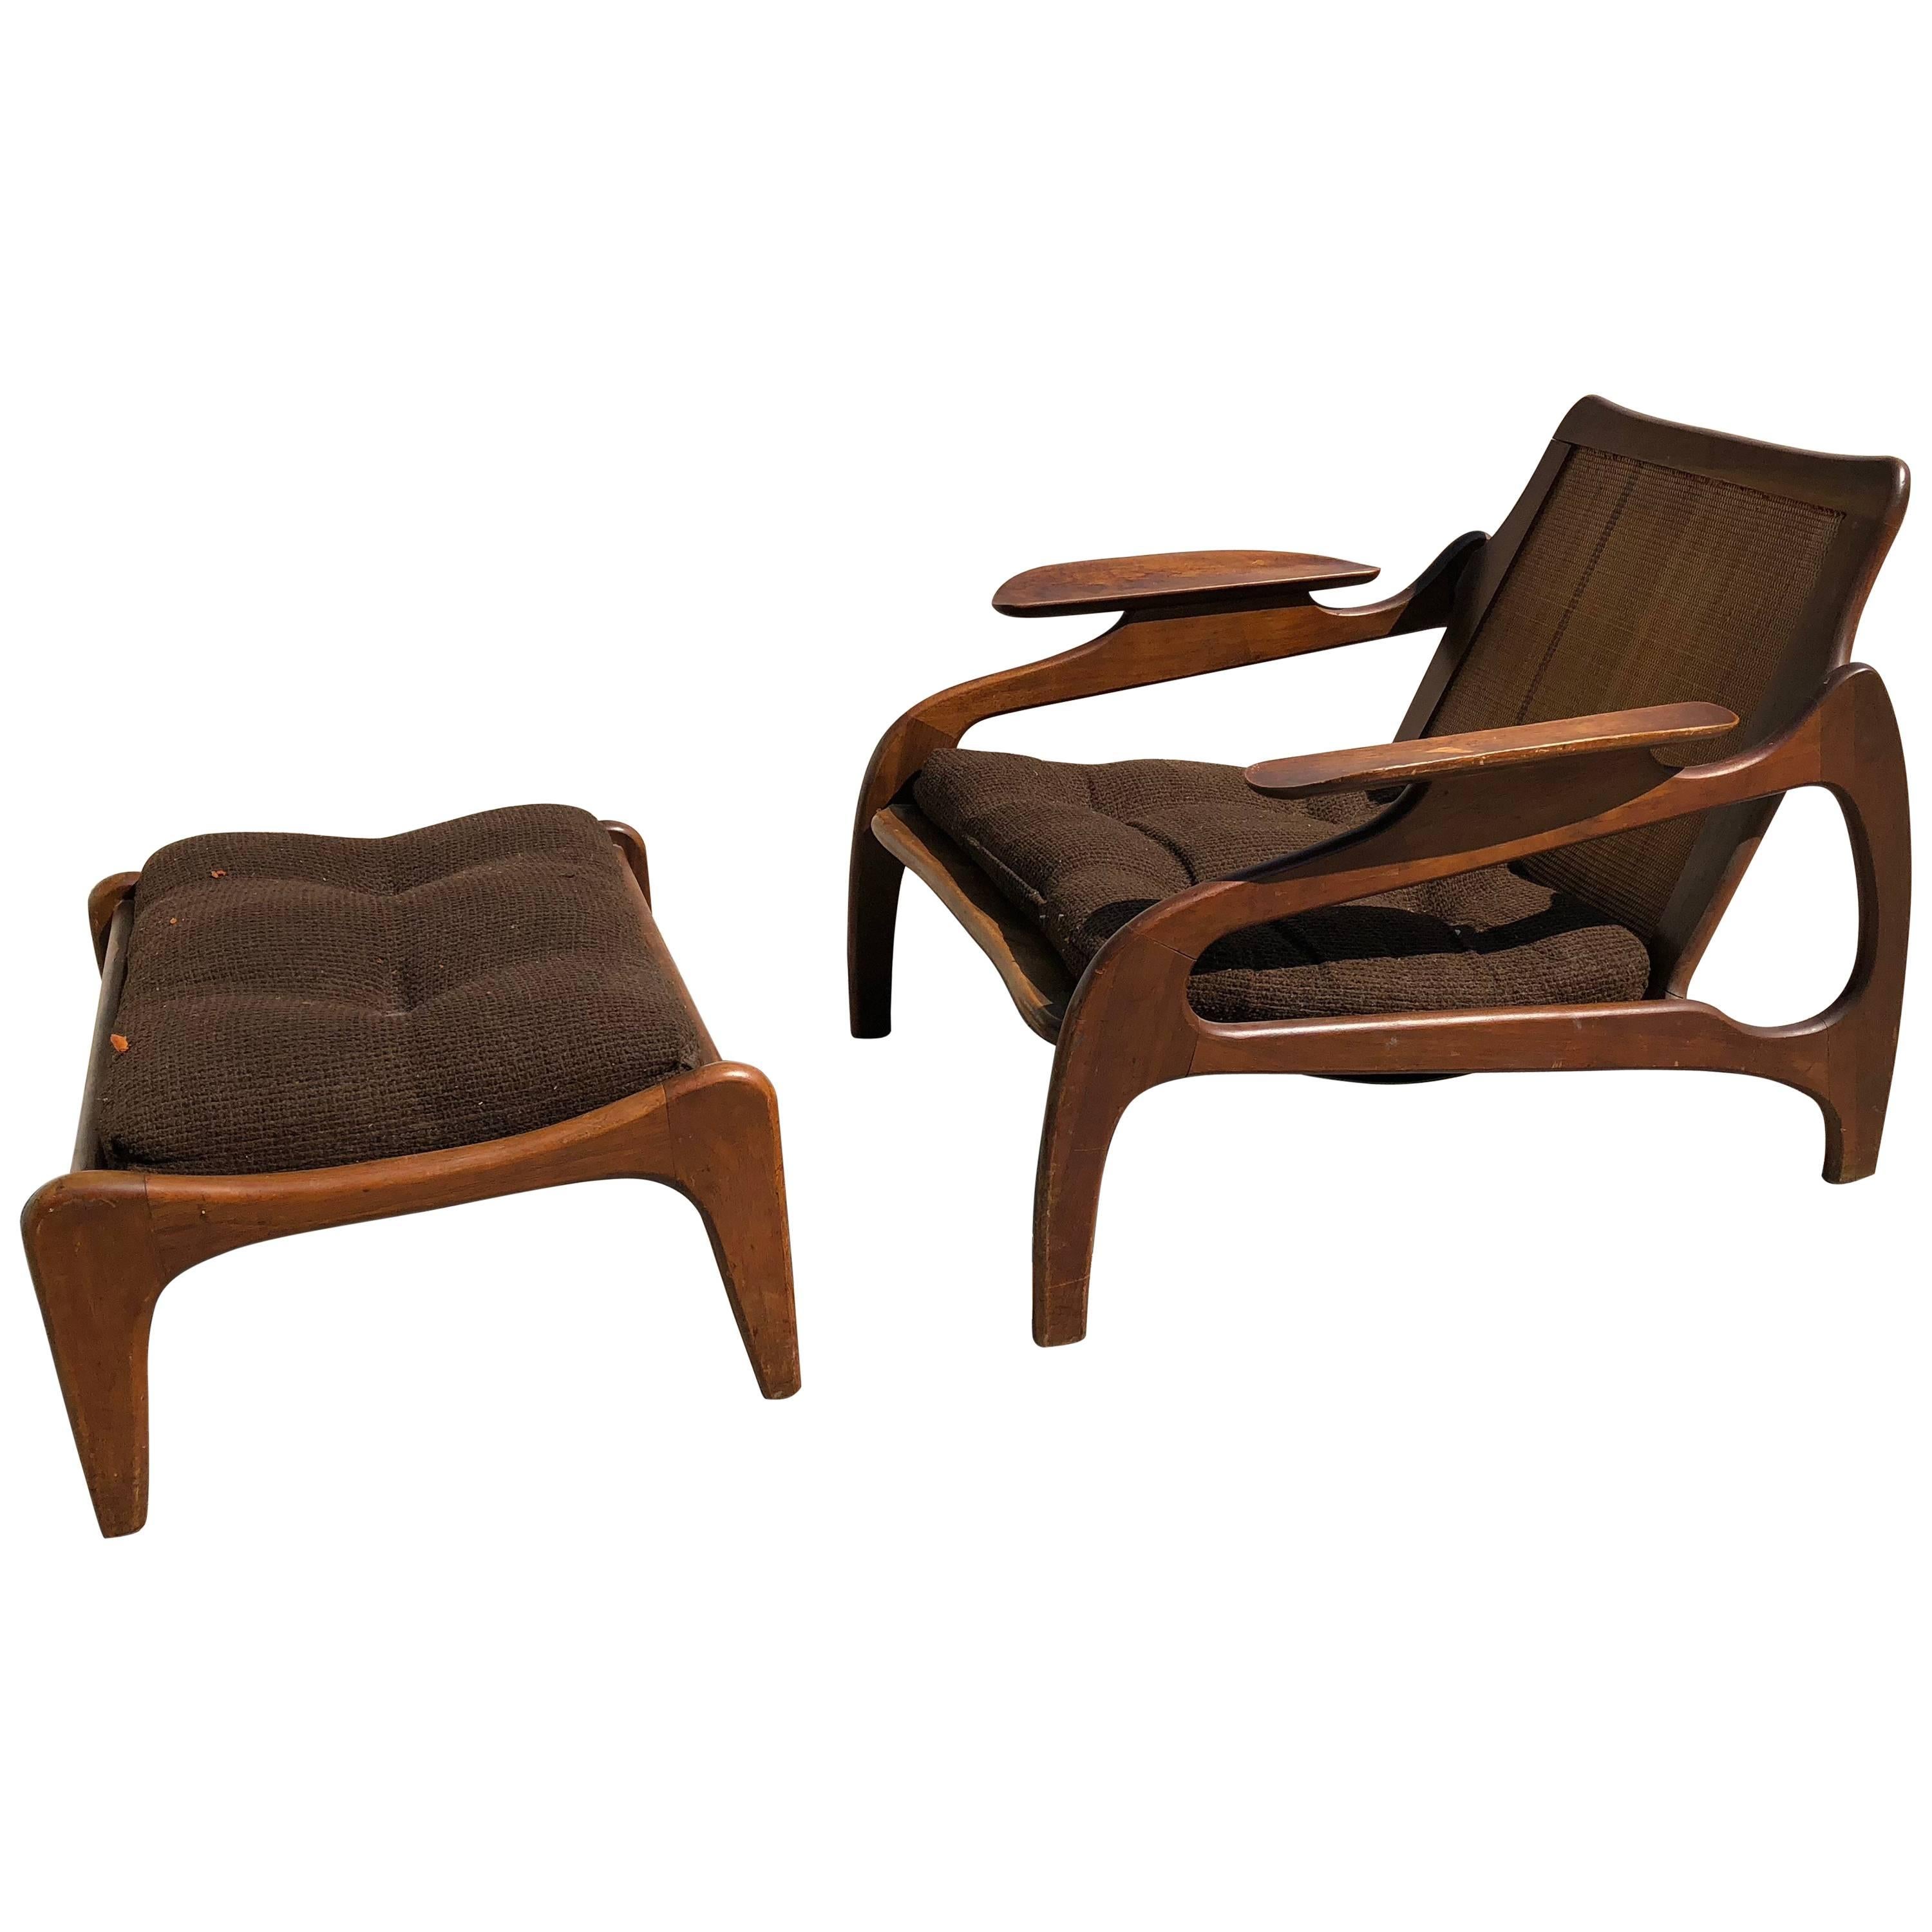 Adrian Pearsall Mid-Century Modern Walnut and Cane Lounge Chair and Ottoman